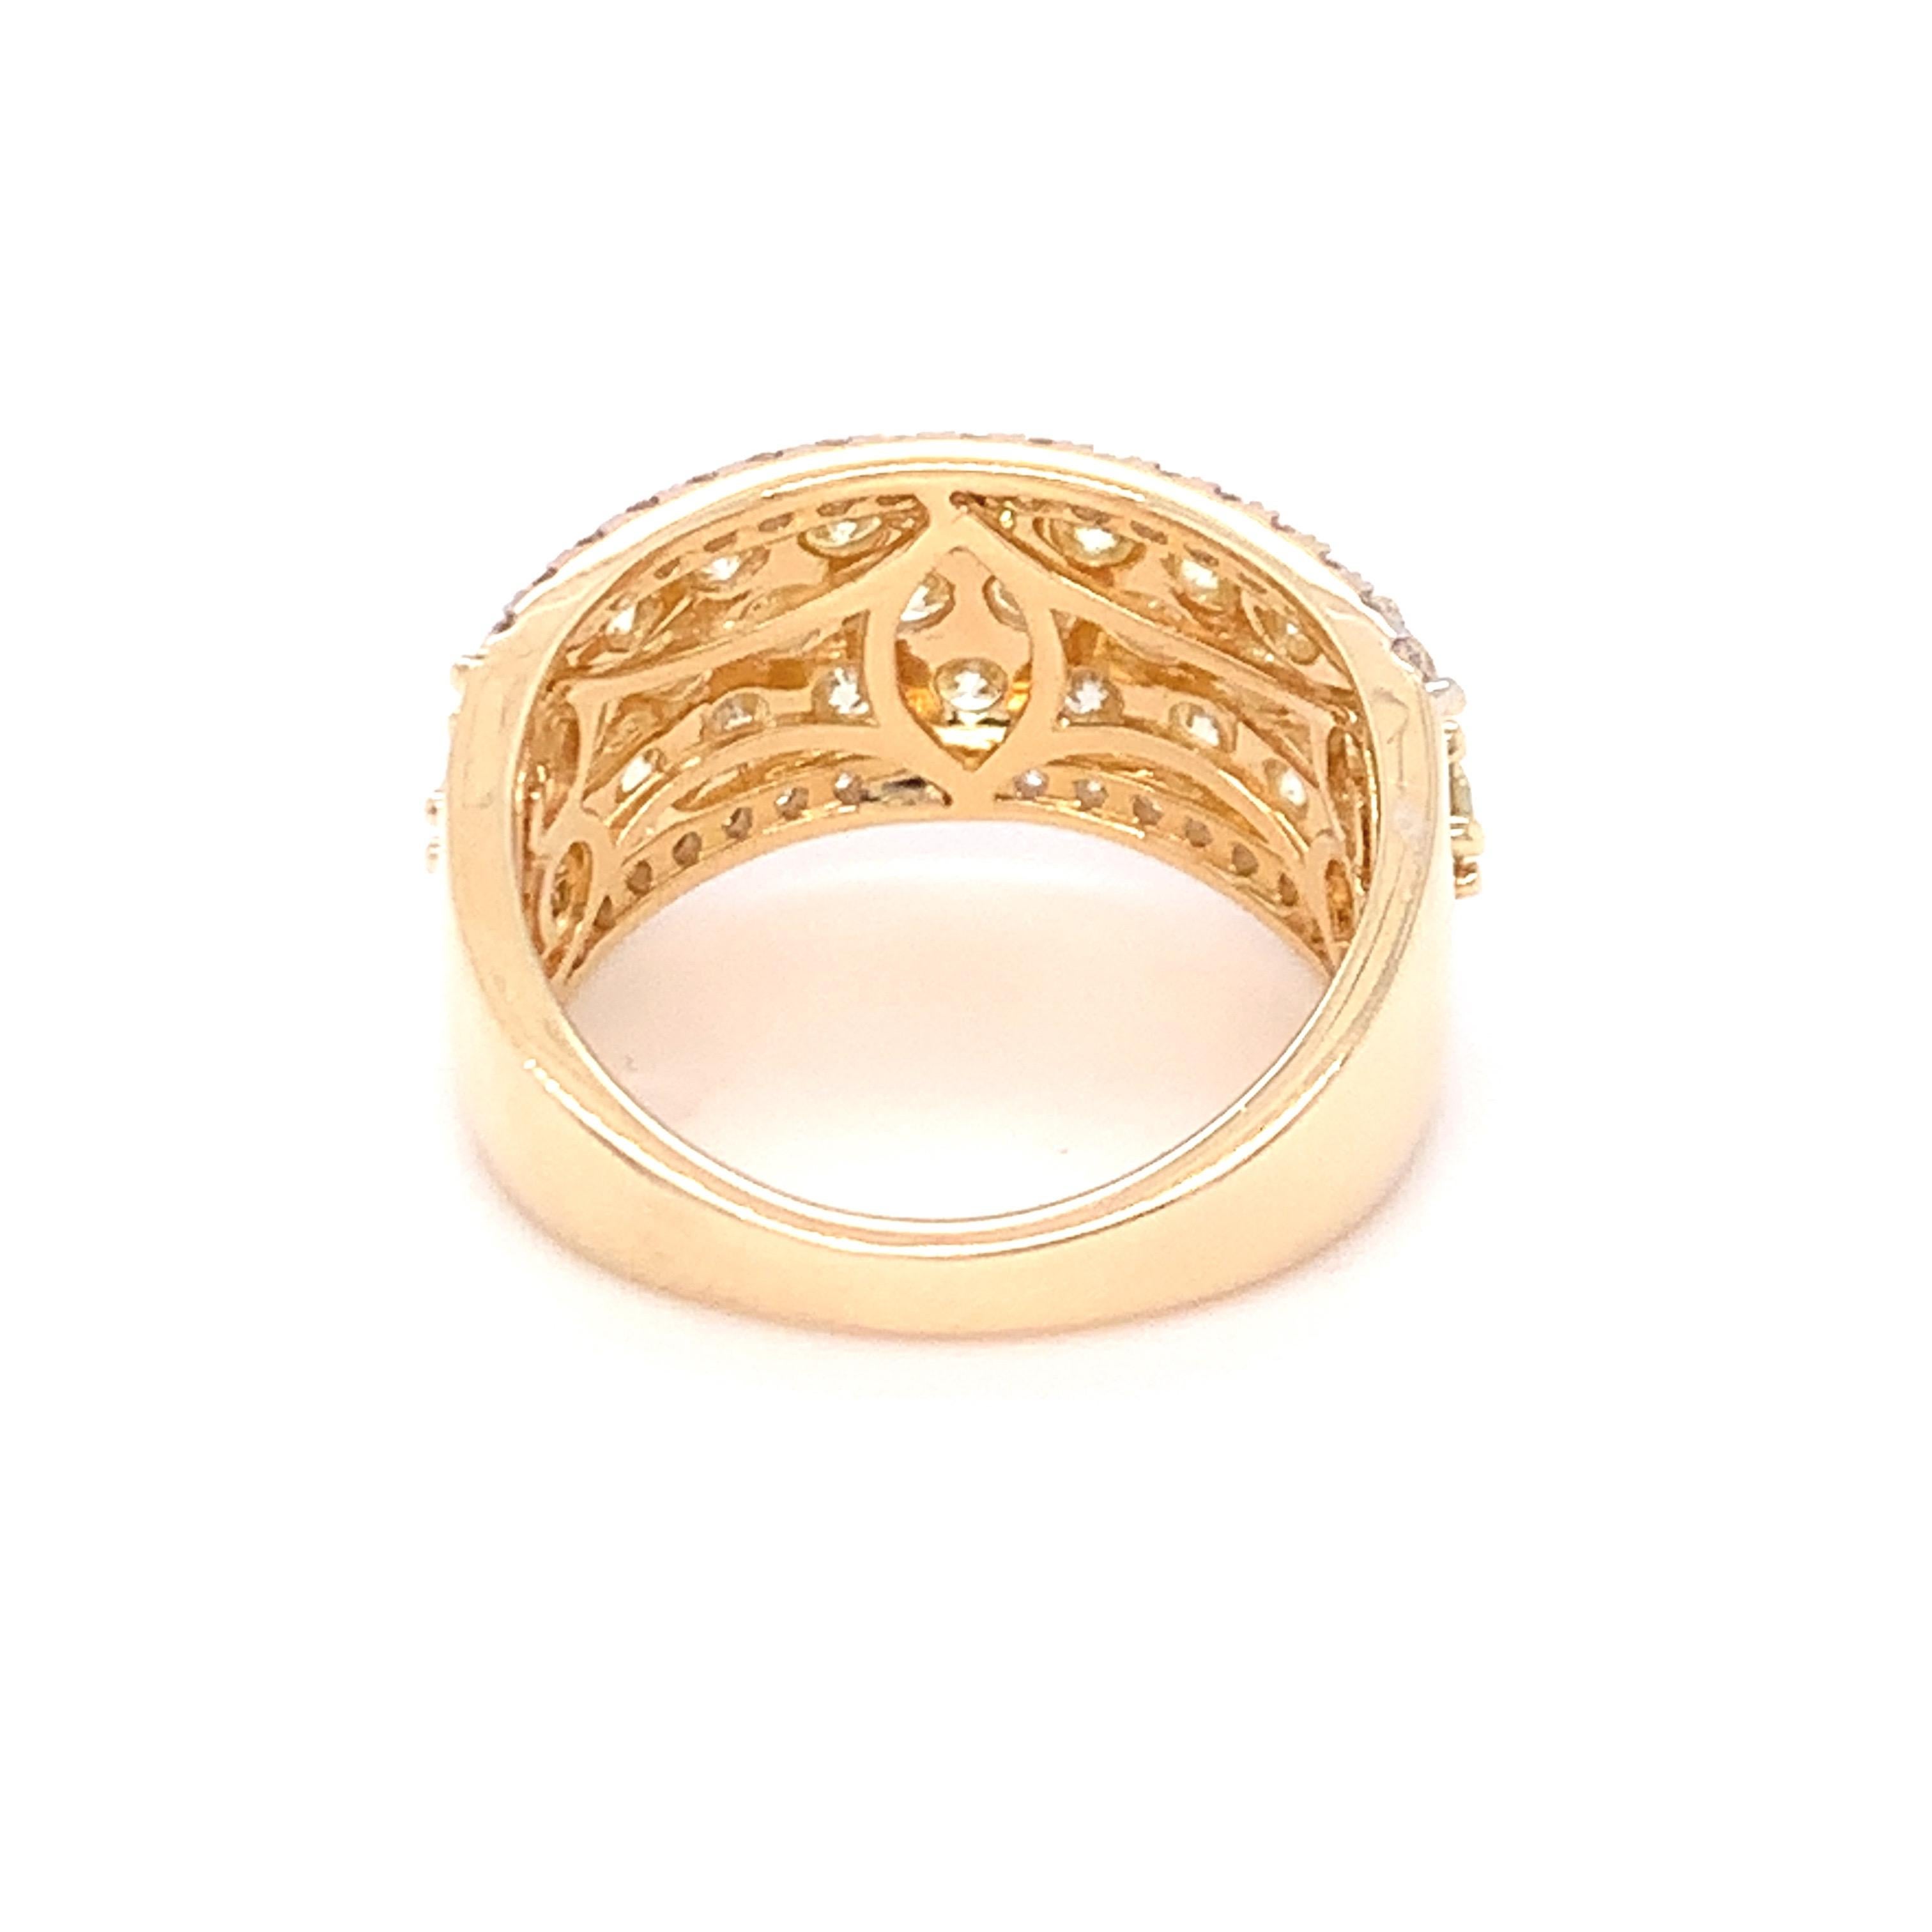 2.50 Carat Yellow & White Diamond Band Ring in 14k Yellow Gold For Sale 6